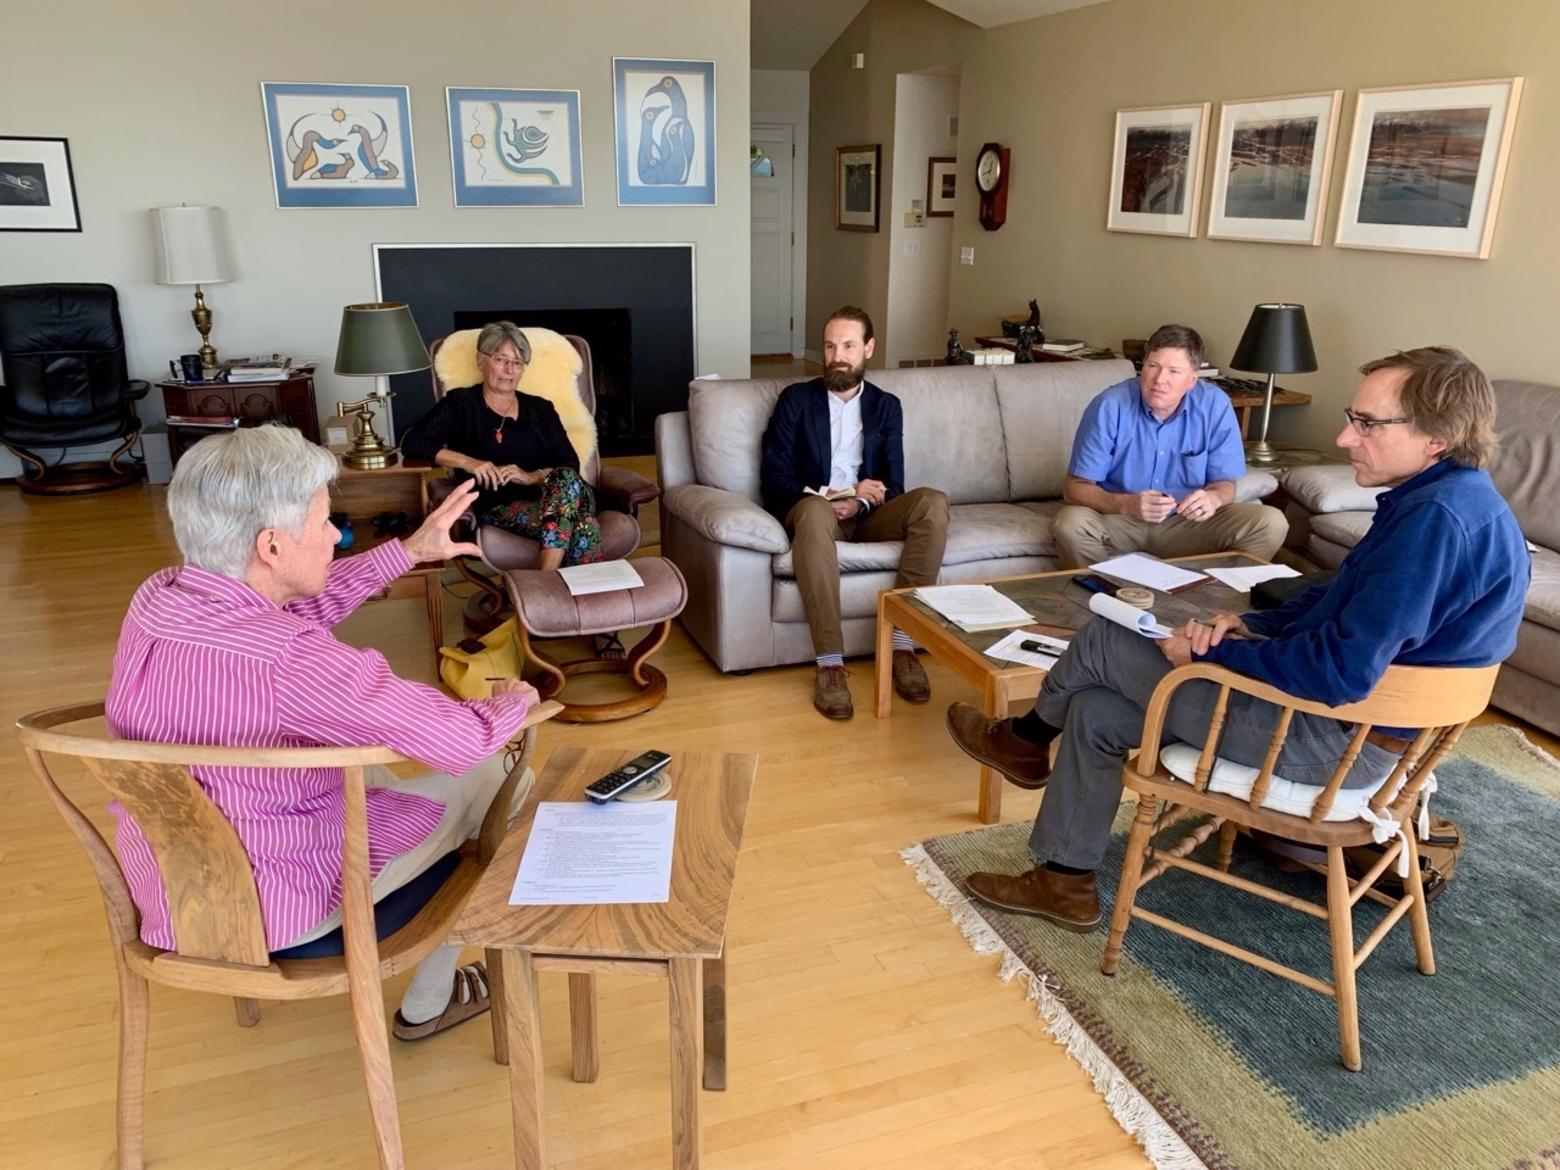 In summer 2019, Carol Doig met with a group of visitors and discussed her husband's journey in his last years. Joining them was her close friend,  Betty Mayfield, who helped assemble Doig's edited manuscripts, diaries, correspondence and other documents that today are part of the MSU Doig collection. Those joining Carol in her living are, left to right, Betty Mayfield,  Dr. Rob Patrick, Justin Shanks a post-doctoral fellow working on the Doig material to make it digitally accessible, and writer Todd Wilkinson of Mountain Journal. Photo by Kenning Arlitsch, dean of MSU Libraries